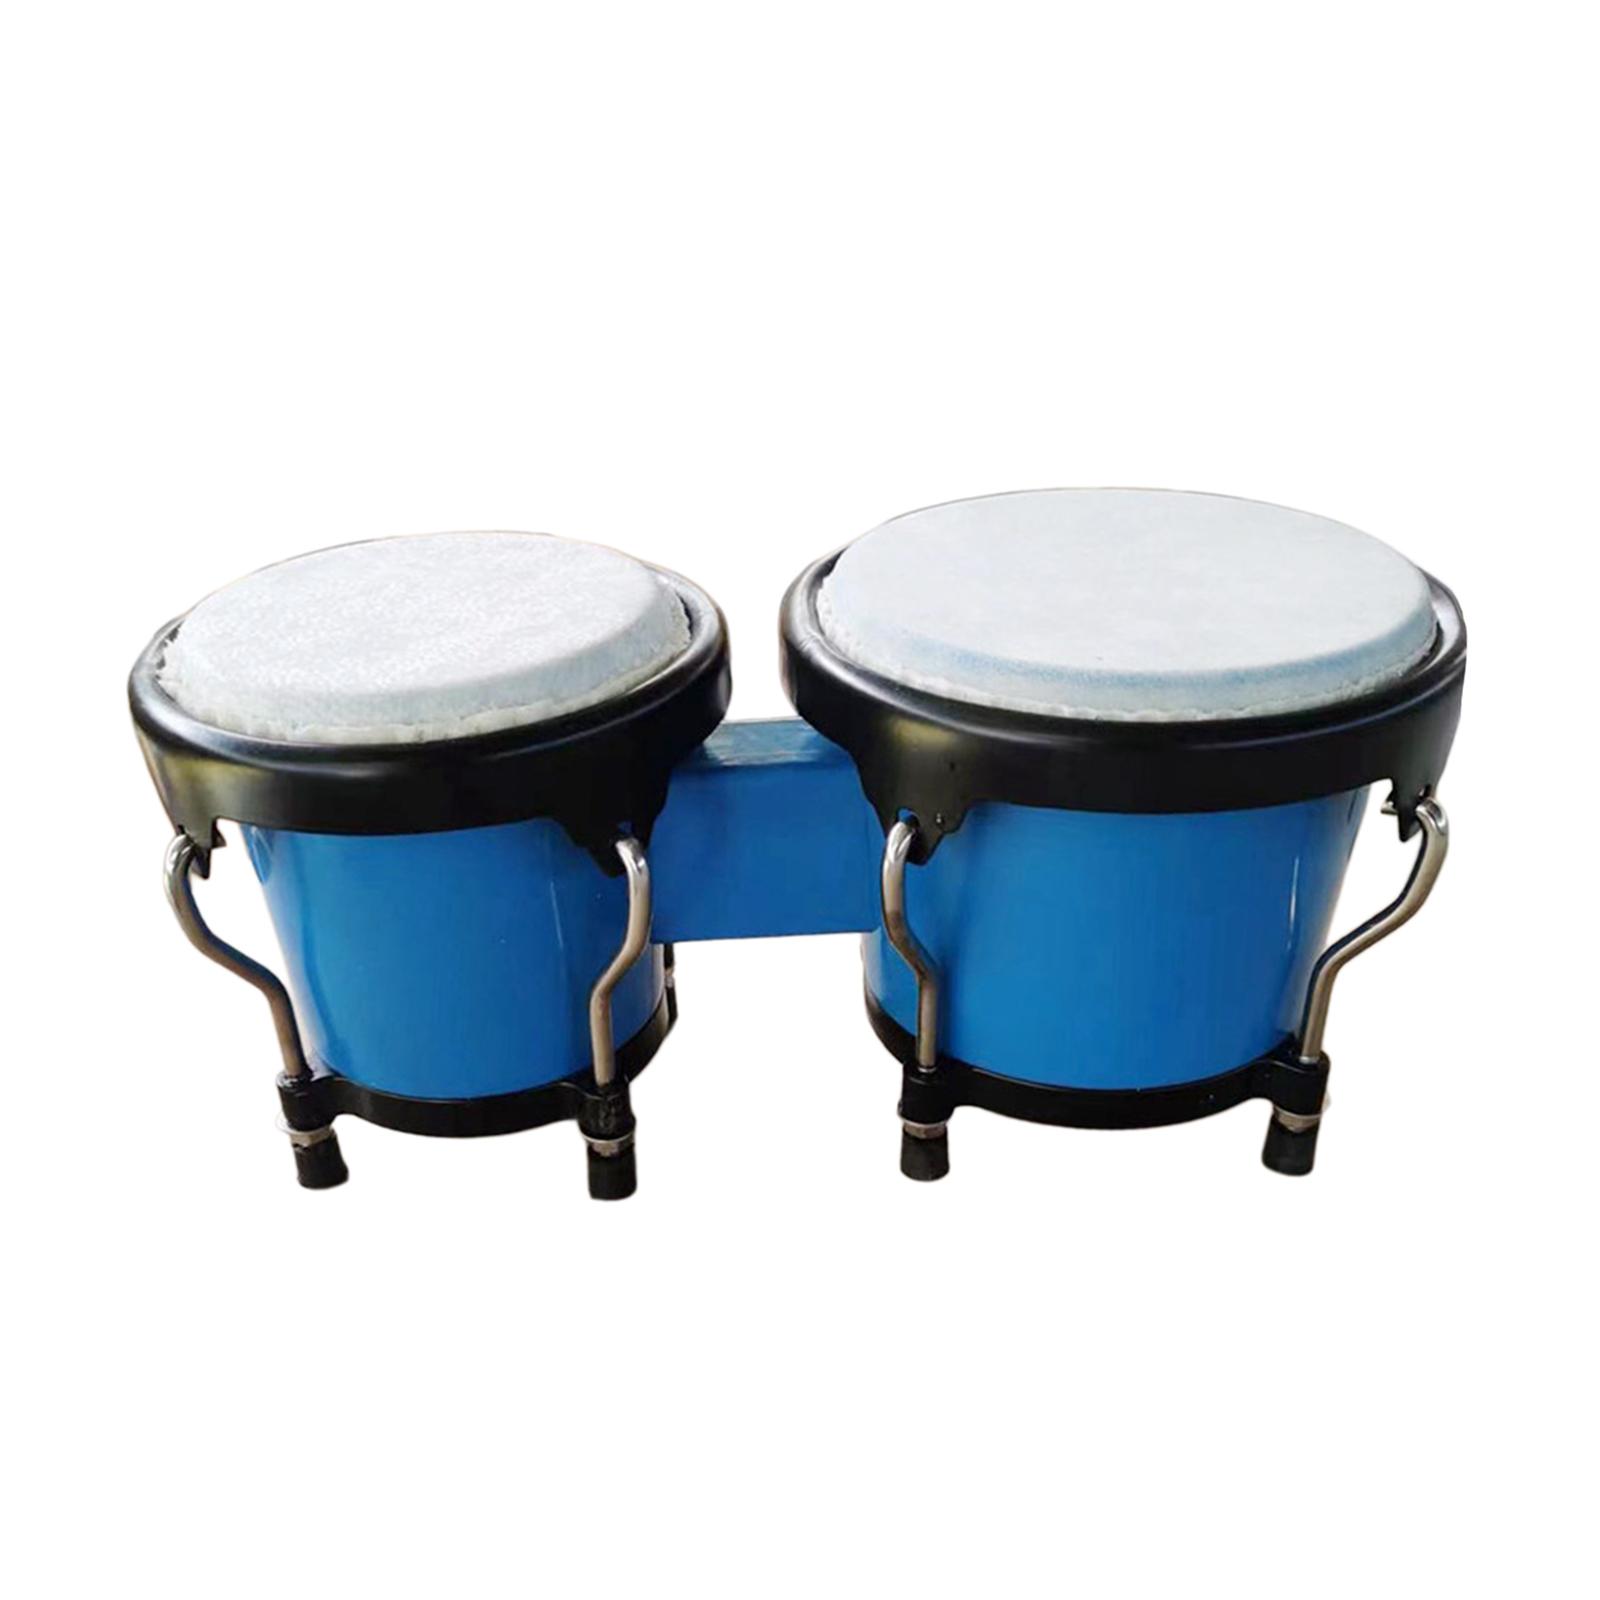 Baoblaze Drum Percussion Instruments Bongo Drum Set for Gifts Adults